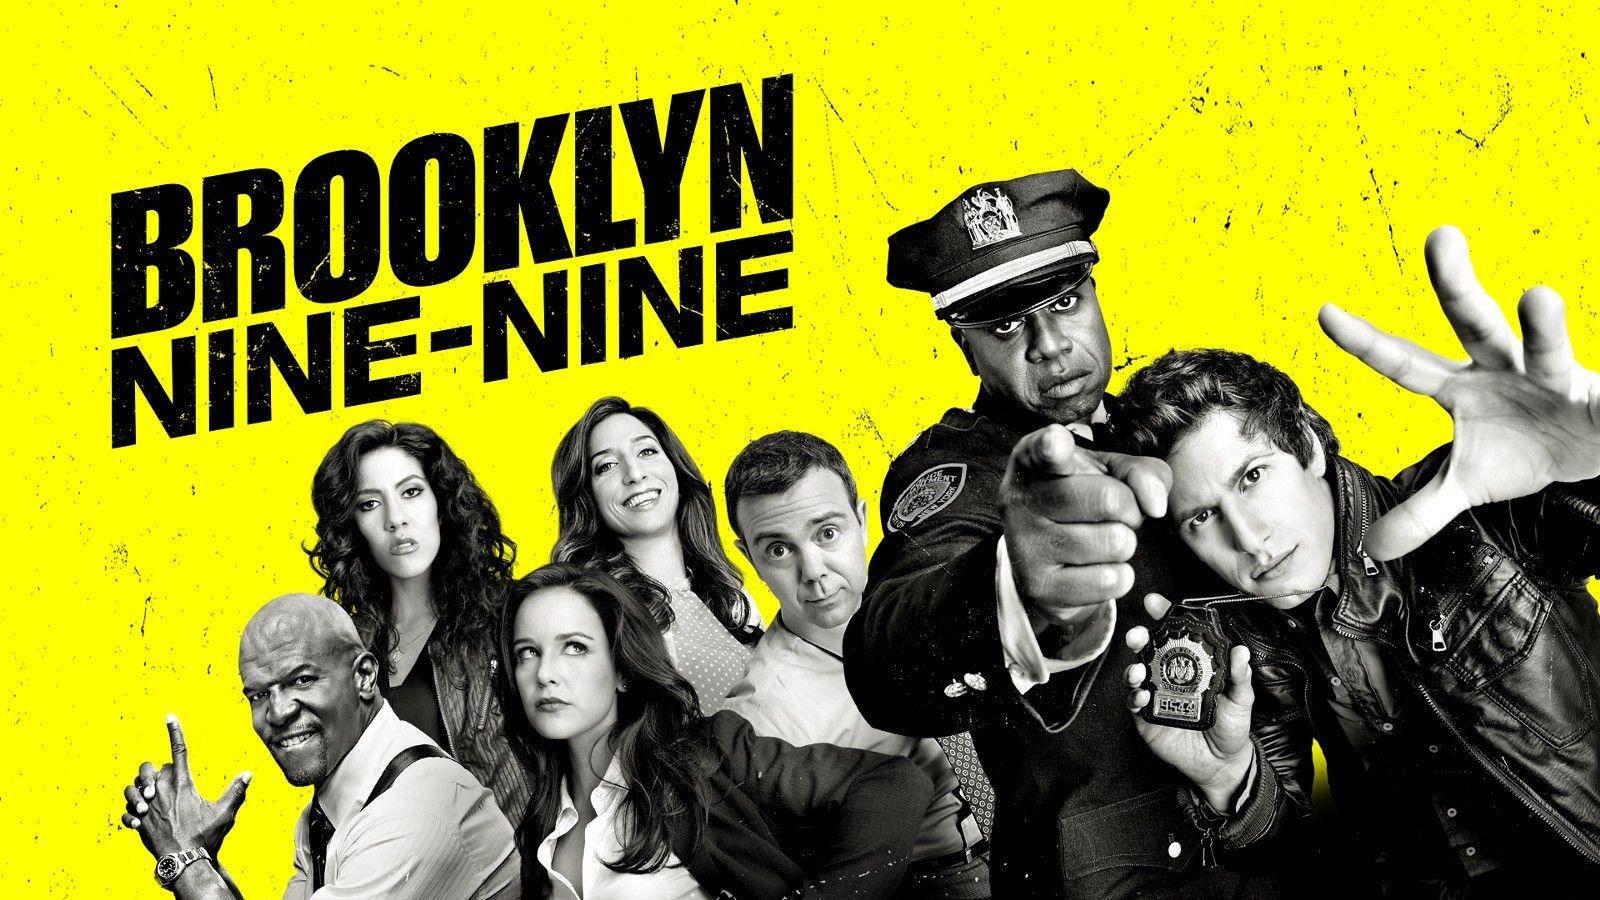 The Cast Of Brooklyn Nine Nine In Action. Background